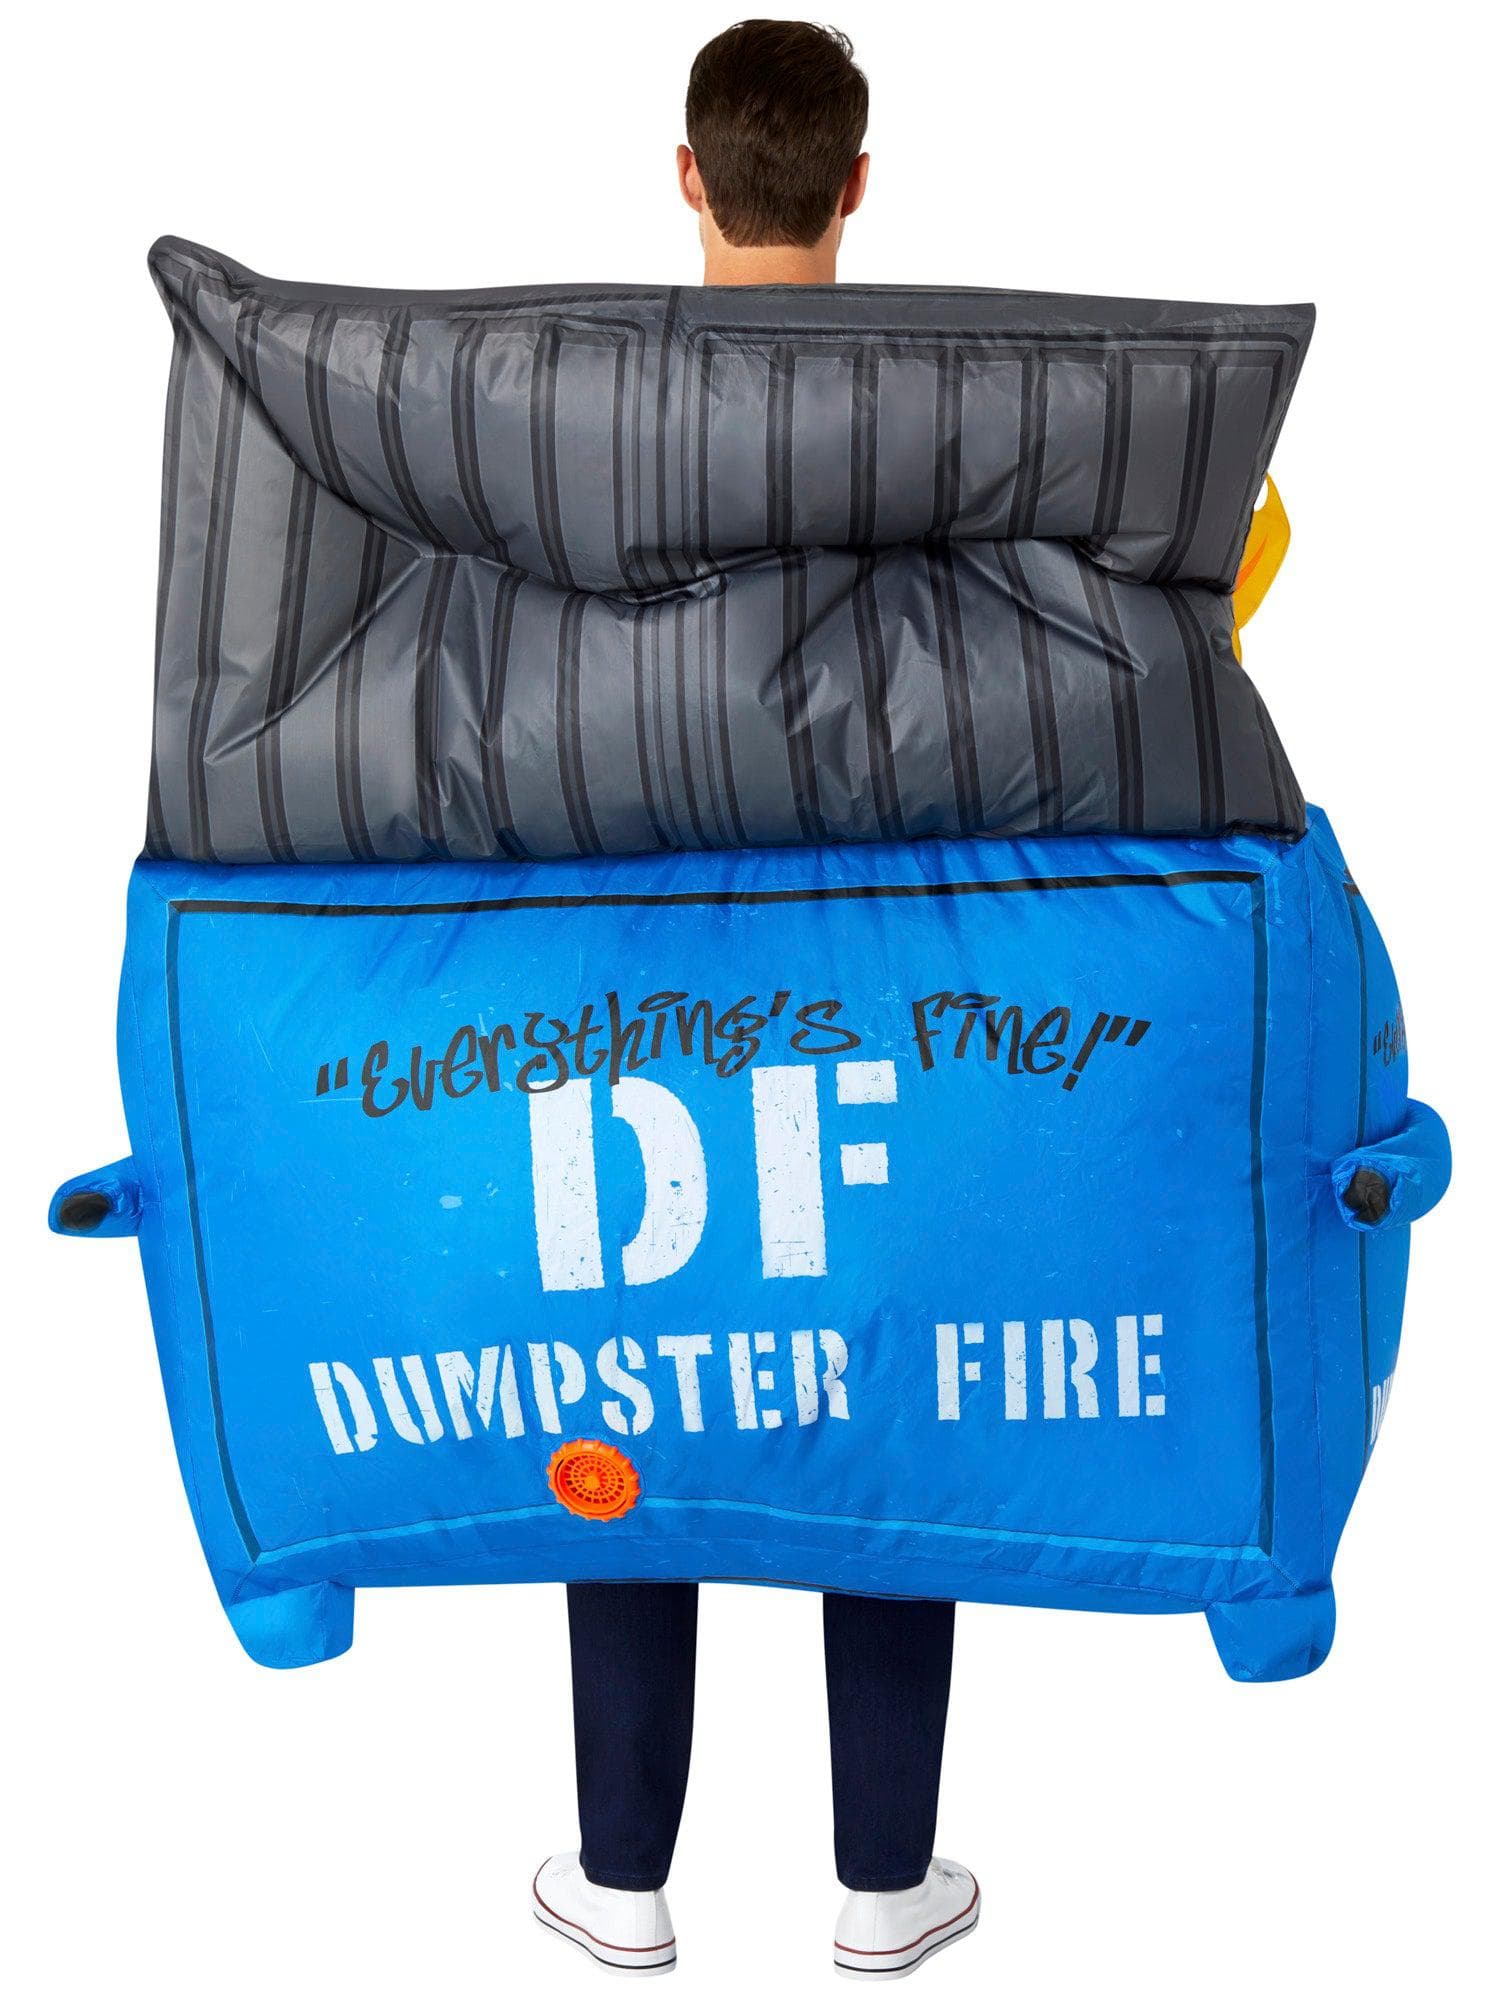 Adult Dumpster Fire Inflatable Costume - costumes.com